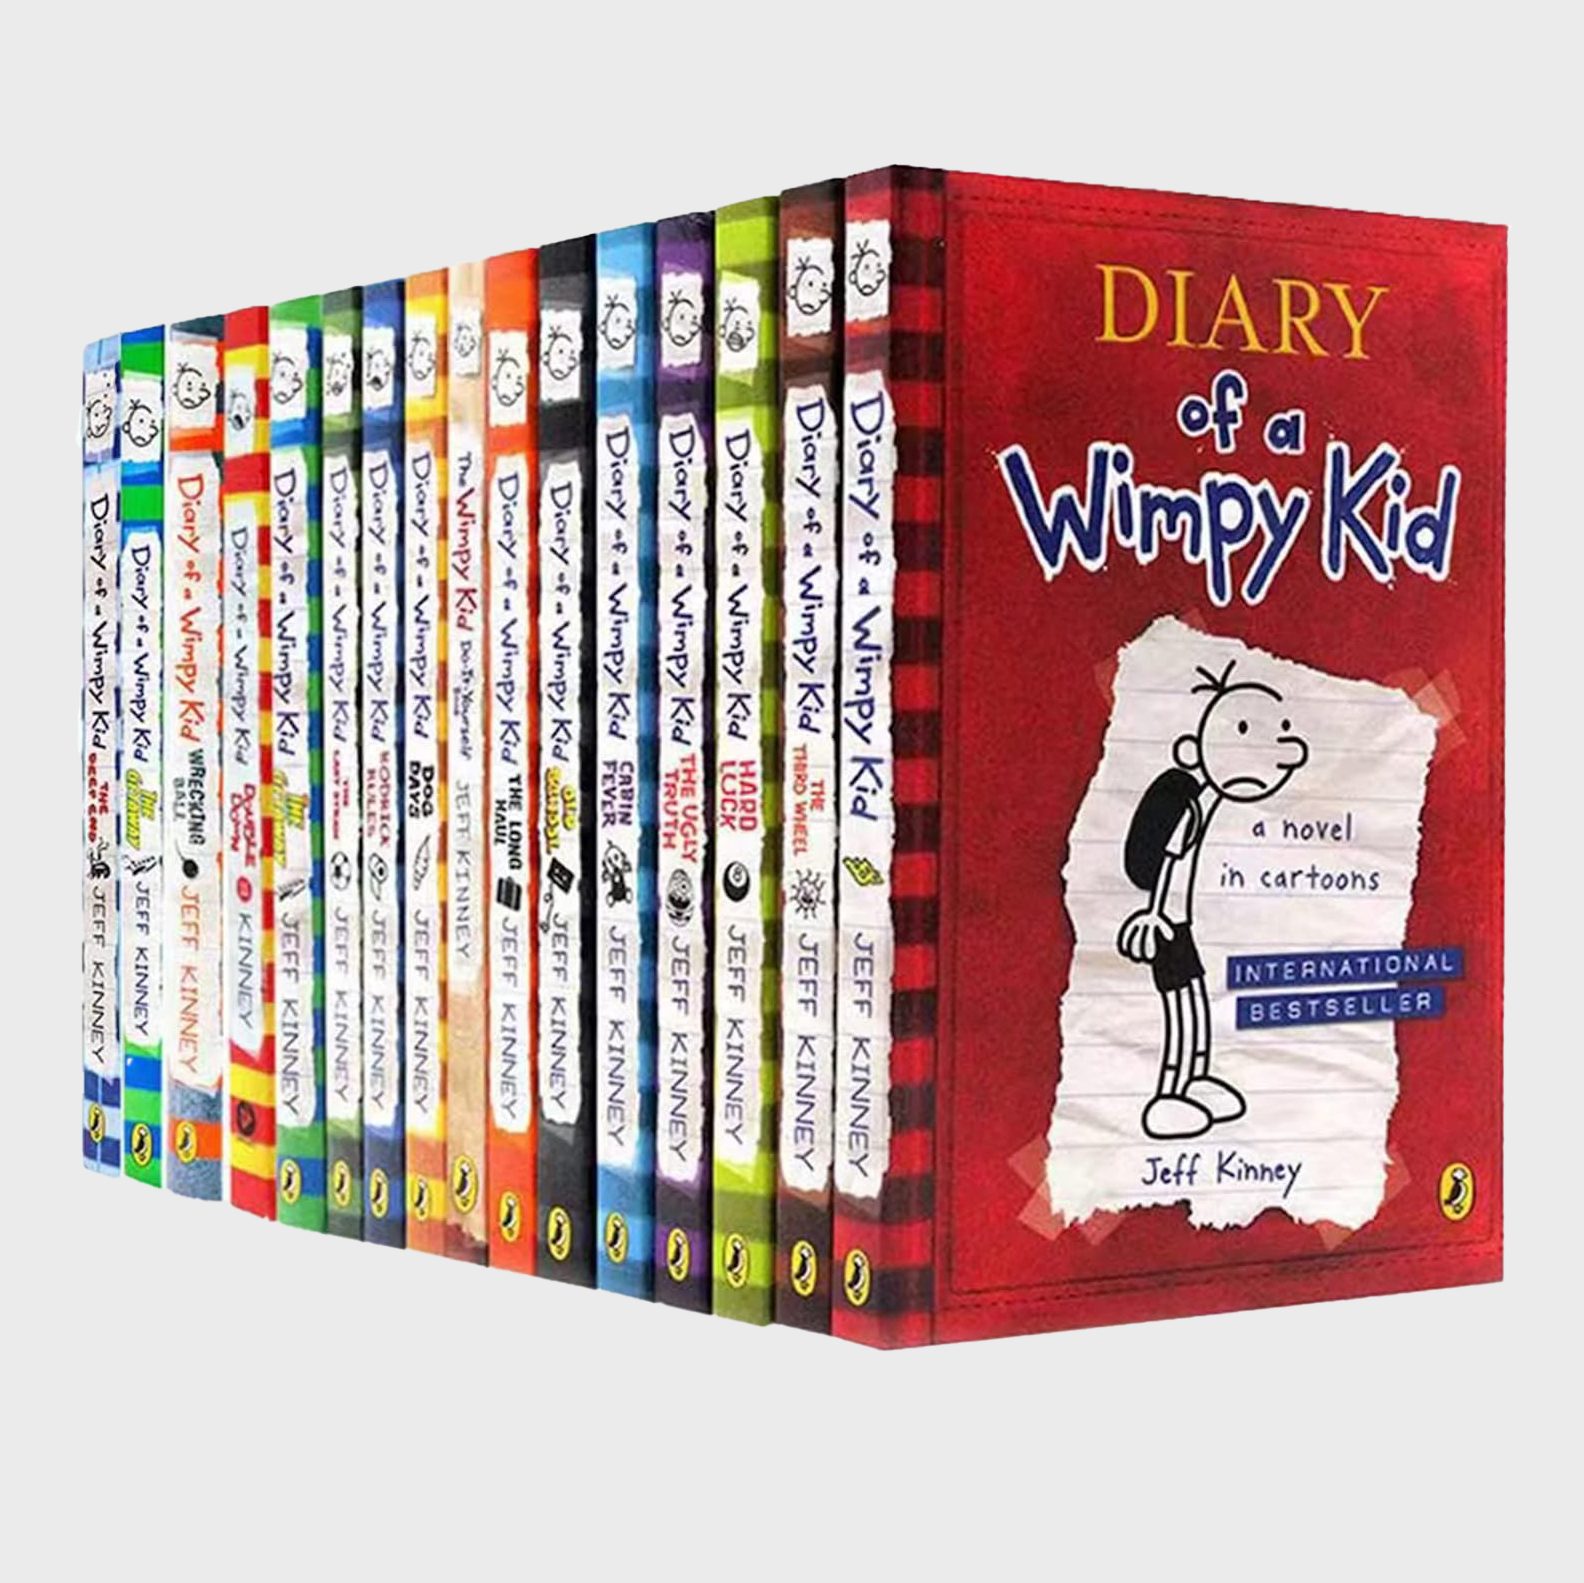 Jeff Kinney Talks the "Diary of a Wimpy Kid" New Book and Disney+ Movie